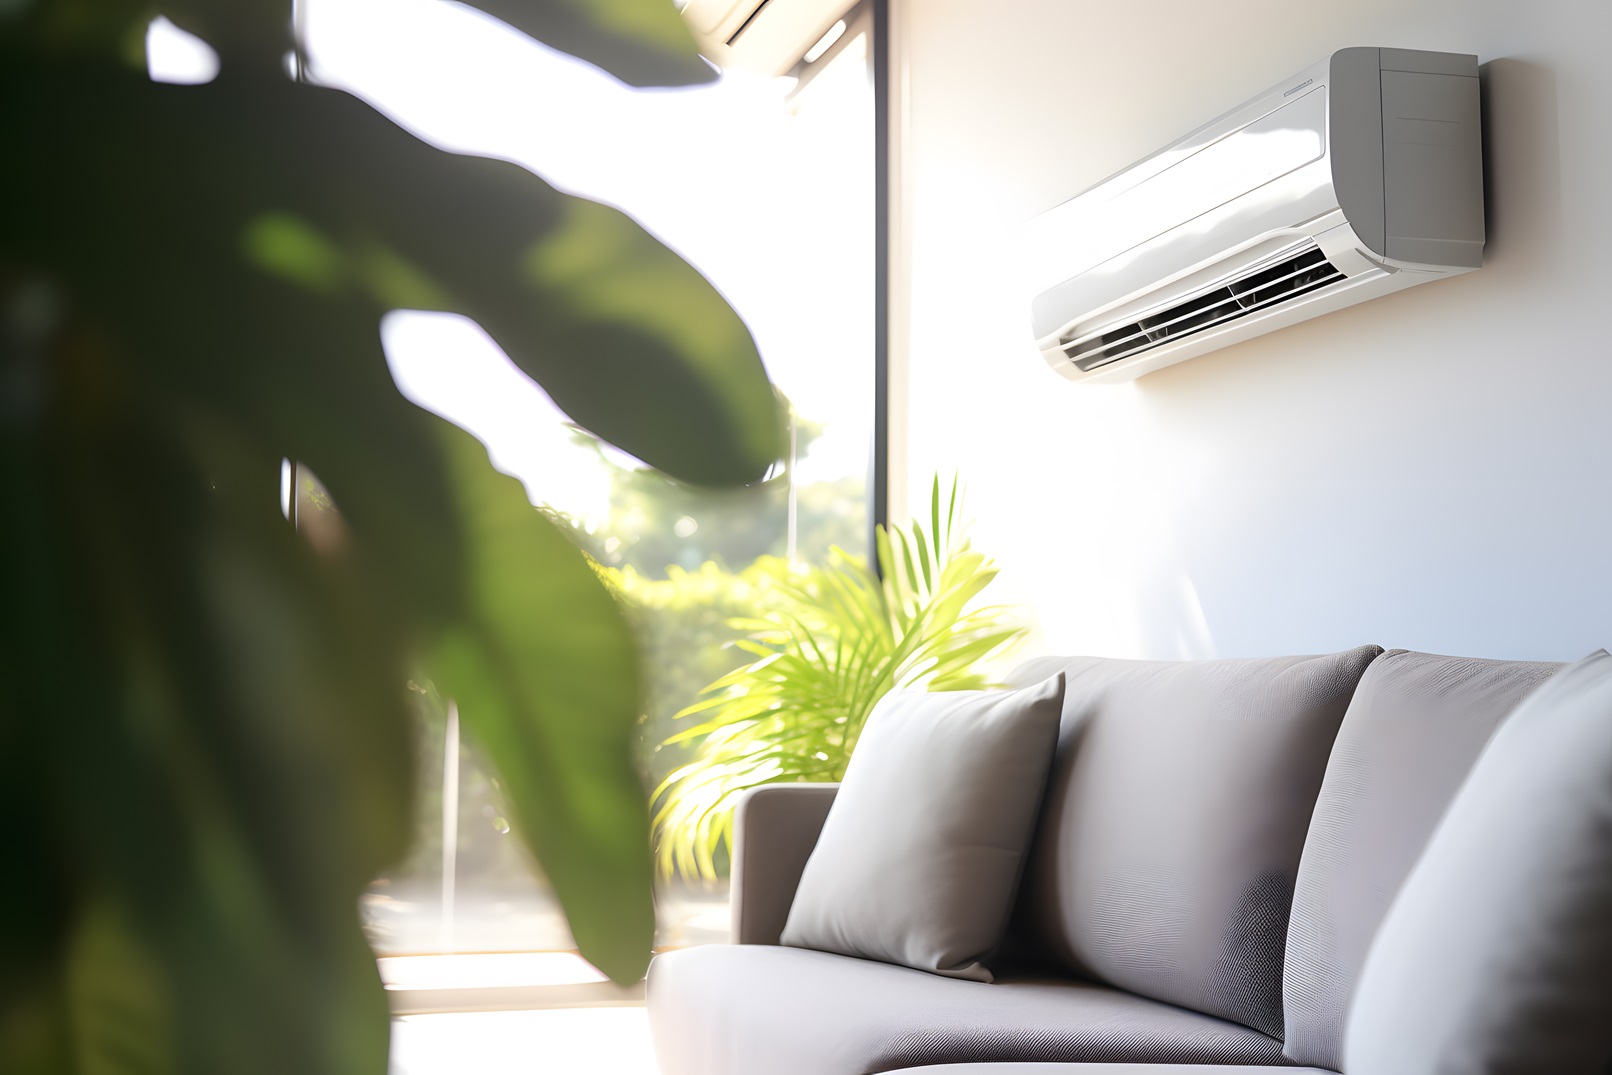 How energy suppliers can keep customers cool in summer without damaging the planet